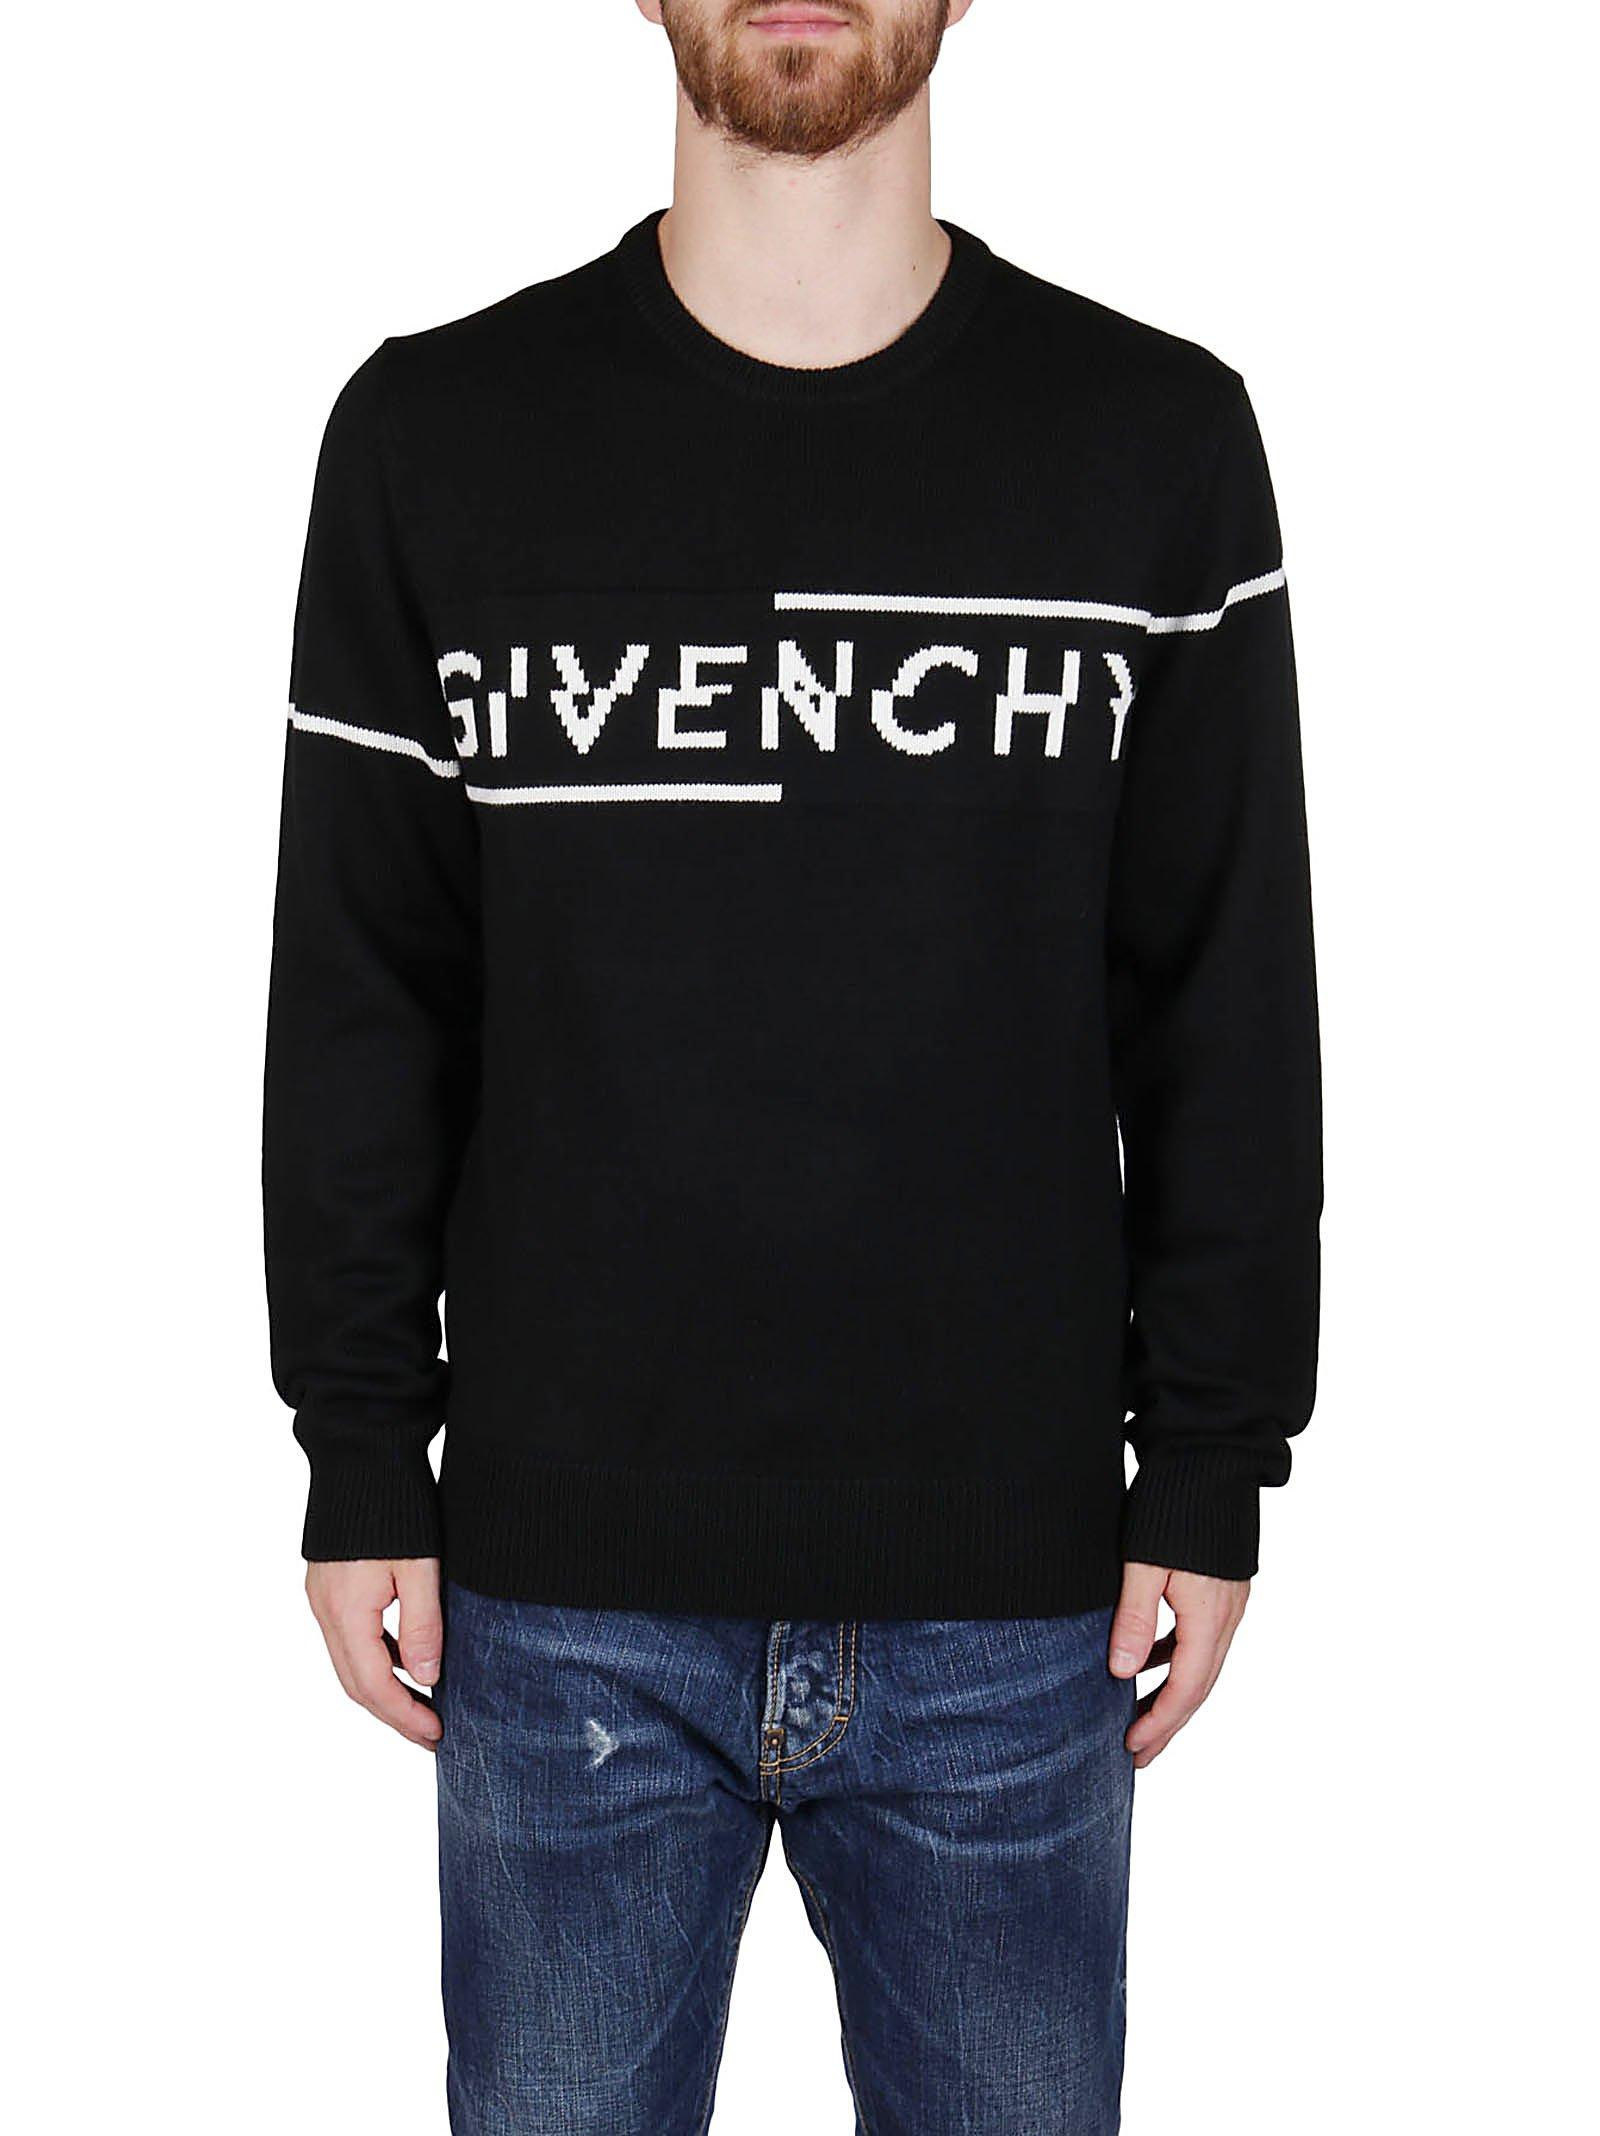 Givenchy Wool Split Knitted Sweater in Black for Men - Lyst